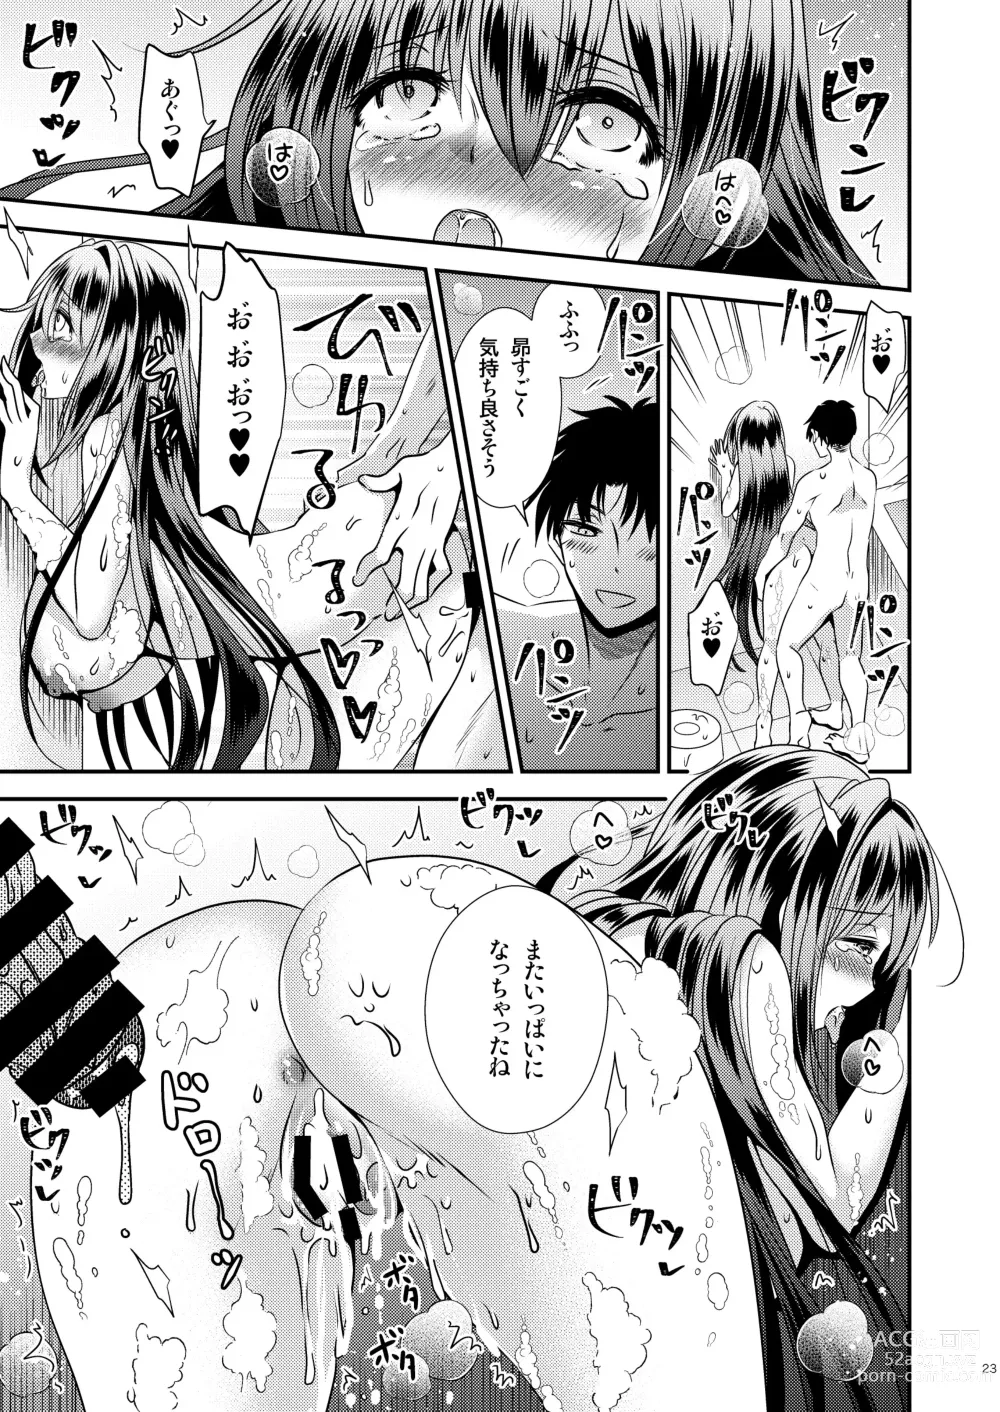 Page 23 of doujinshi 性欲処理に使っていた妹と入れ替わった兄